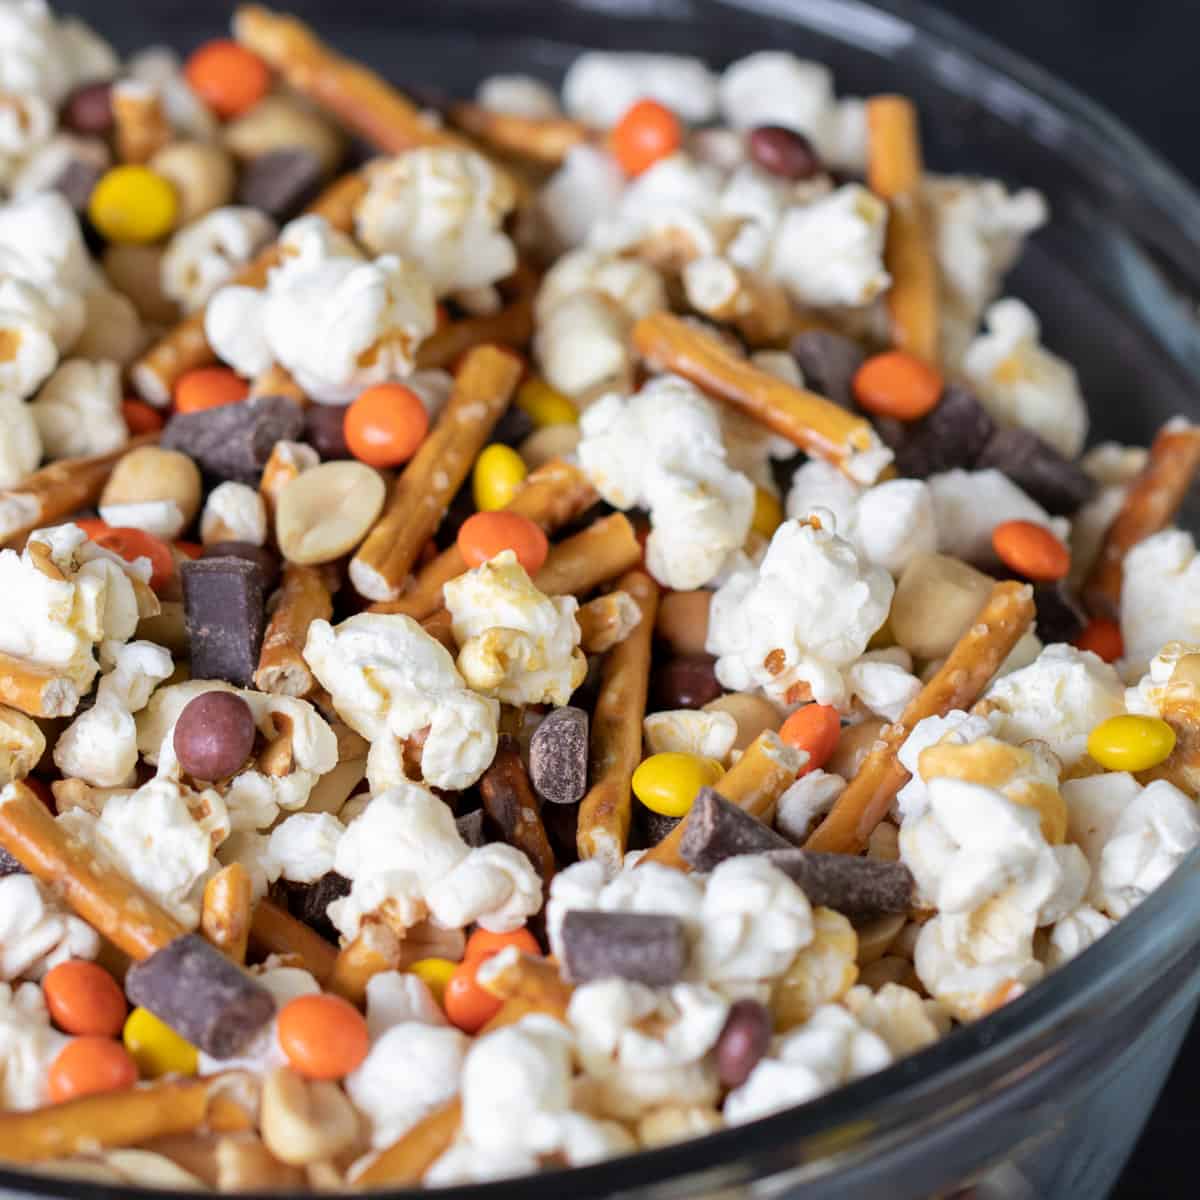 A glass mixing bowl with popcorn, pretzel sticks, chocolate and candy.